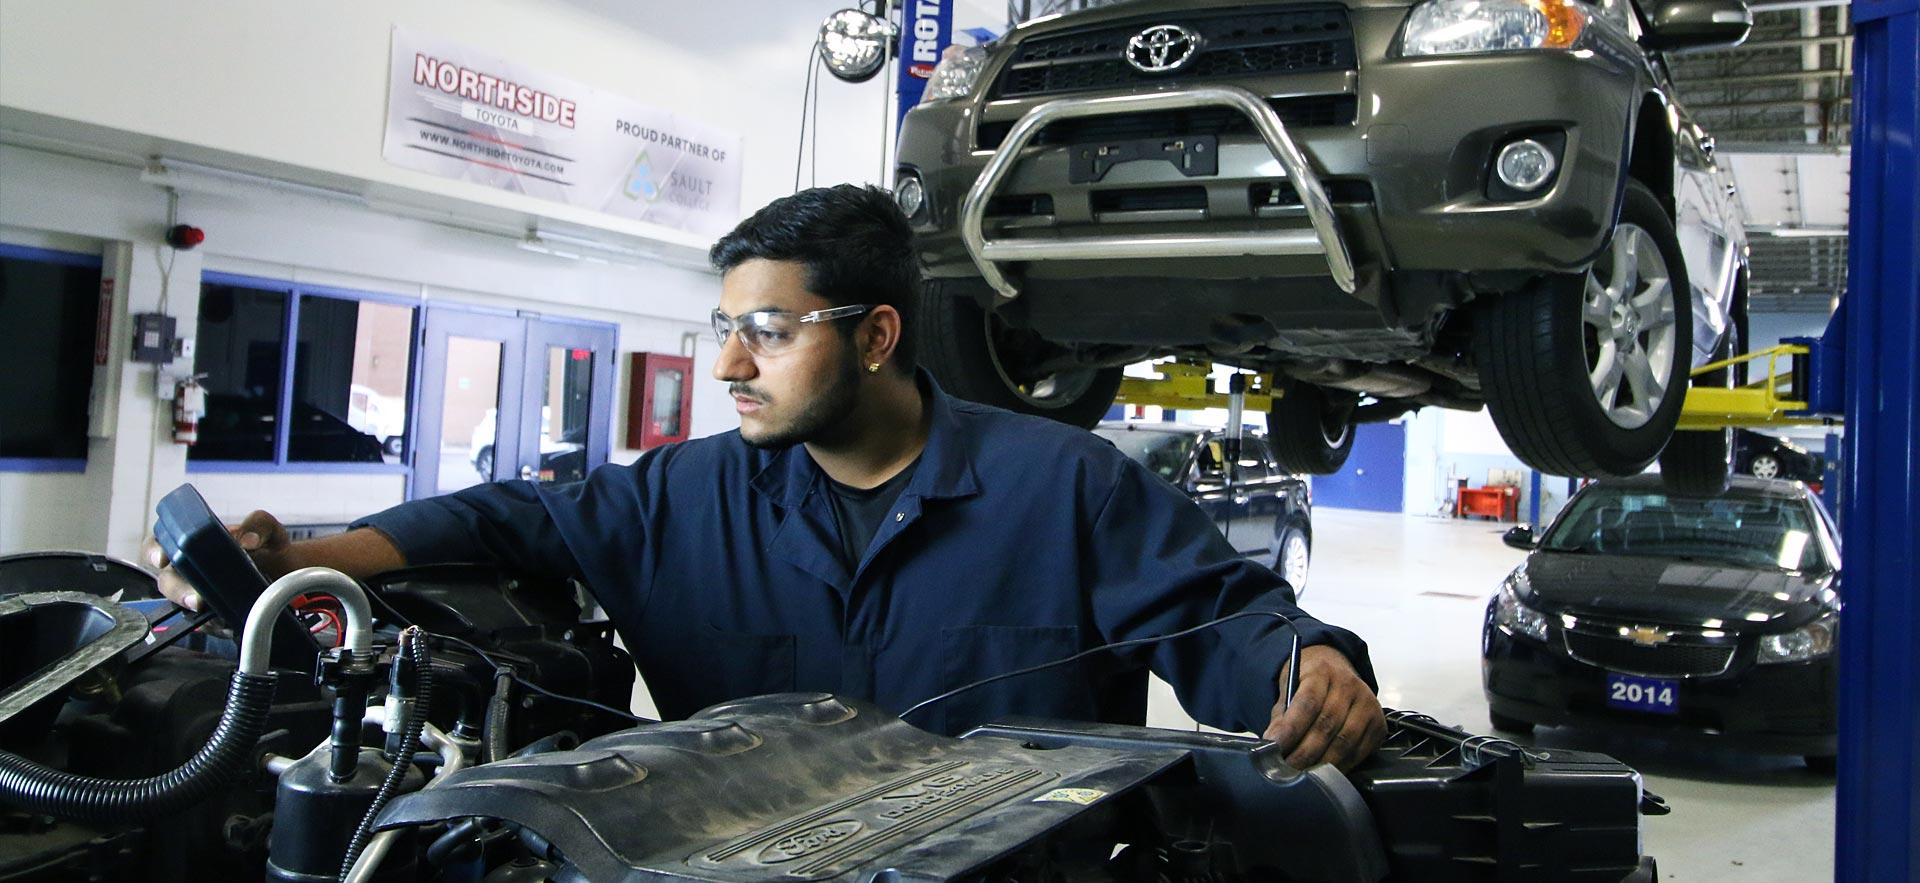 One male Automotive Service Technician student executes some diagnostic tests on an engine.                                                              